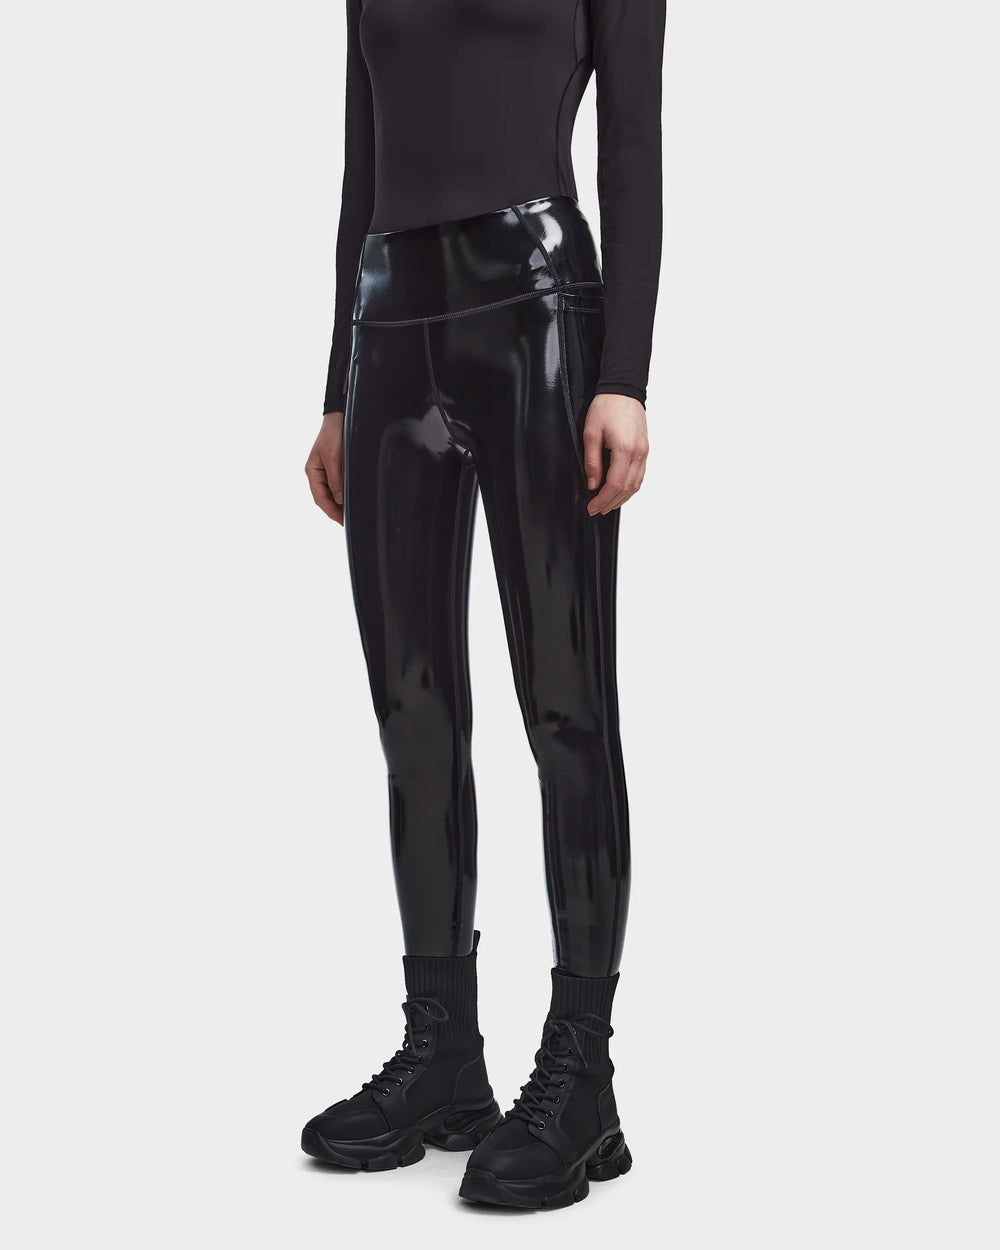 Leather Leggings Fashion • on Instagram: “Latex High Quality Pants